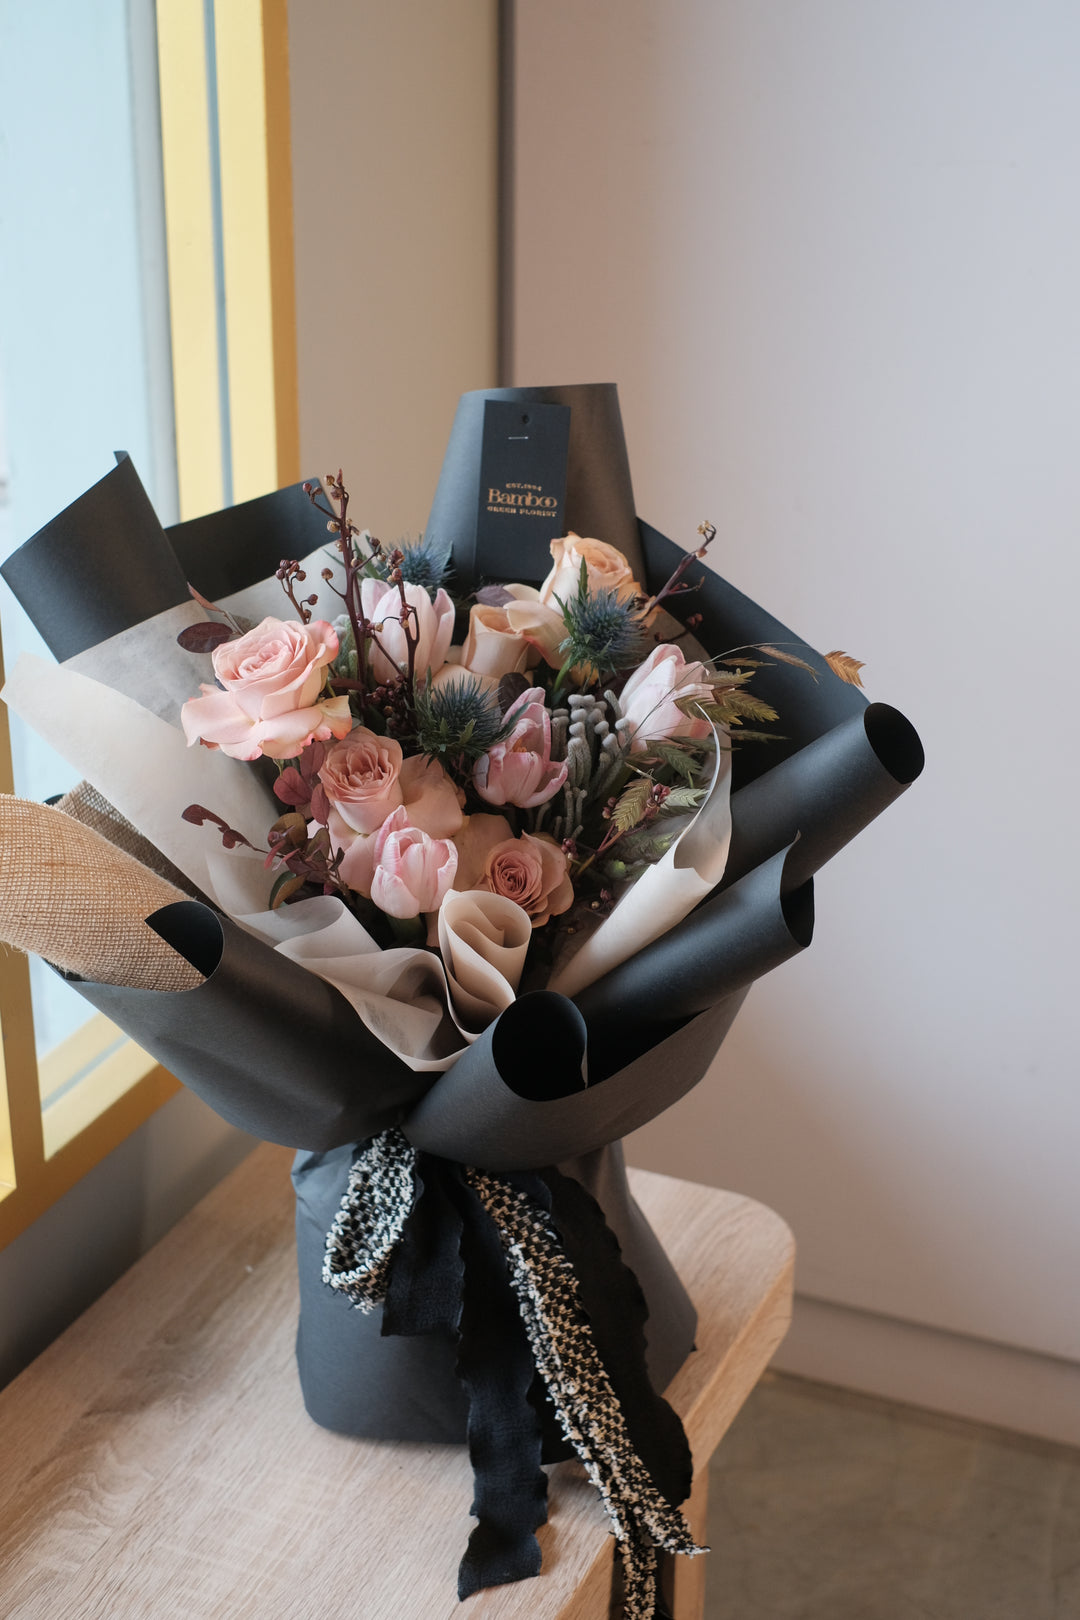 coffee-inspired flower arrangement with cappuccino roses, tulips and eryngium, available as graduation bouquet, bridal bouquet or proposal with flowers